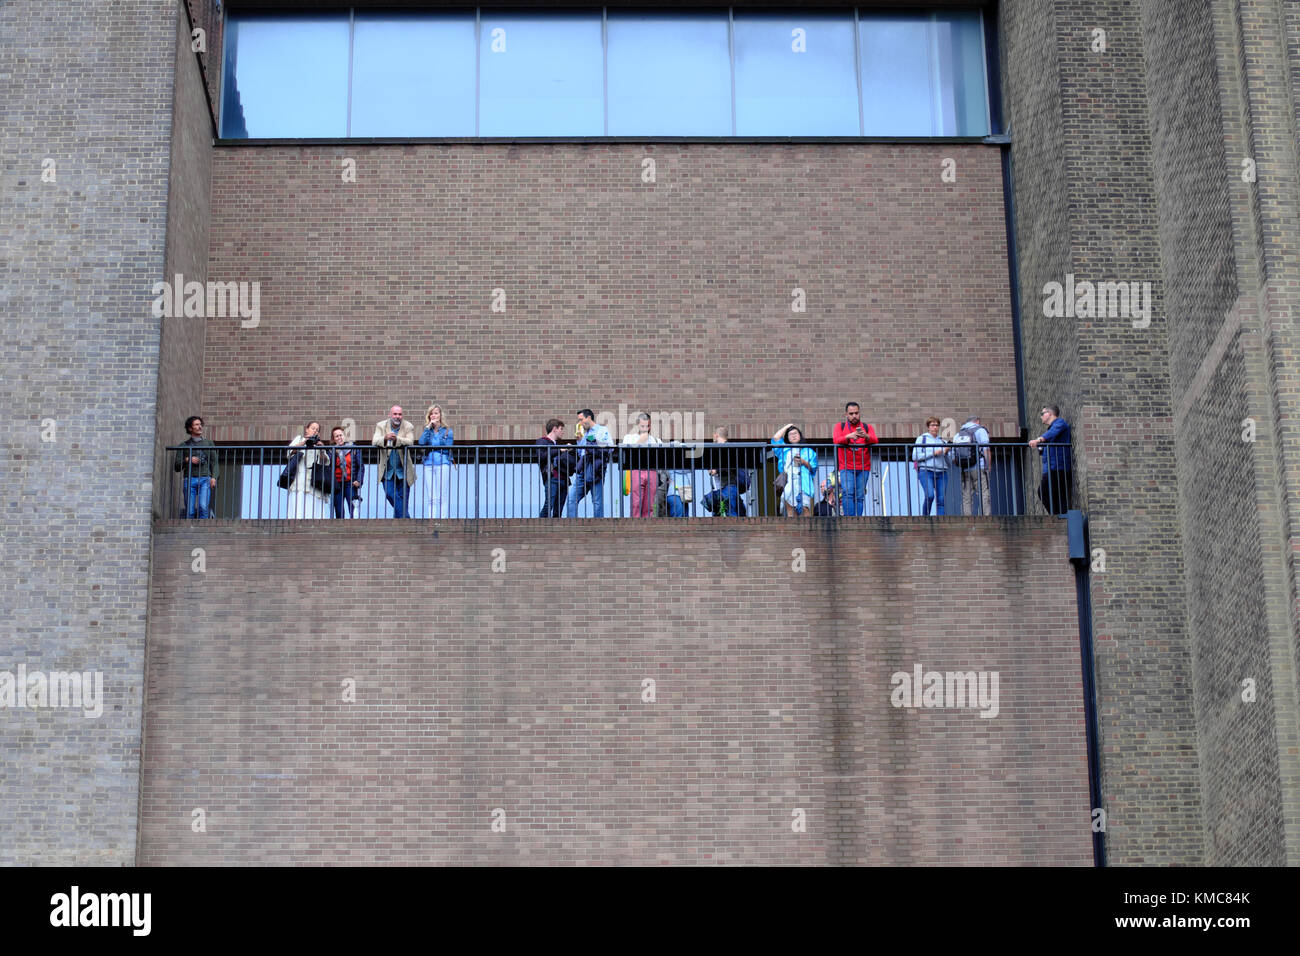 people sightseeing from a hign balcony at the Tate modern Gallery in London, England, UK (taken from public area) Stock Photo